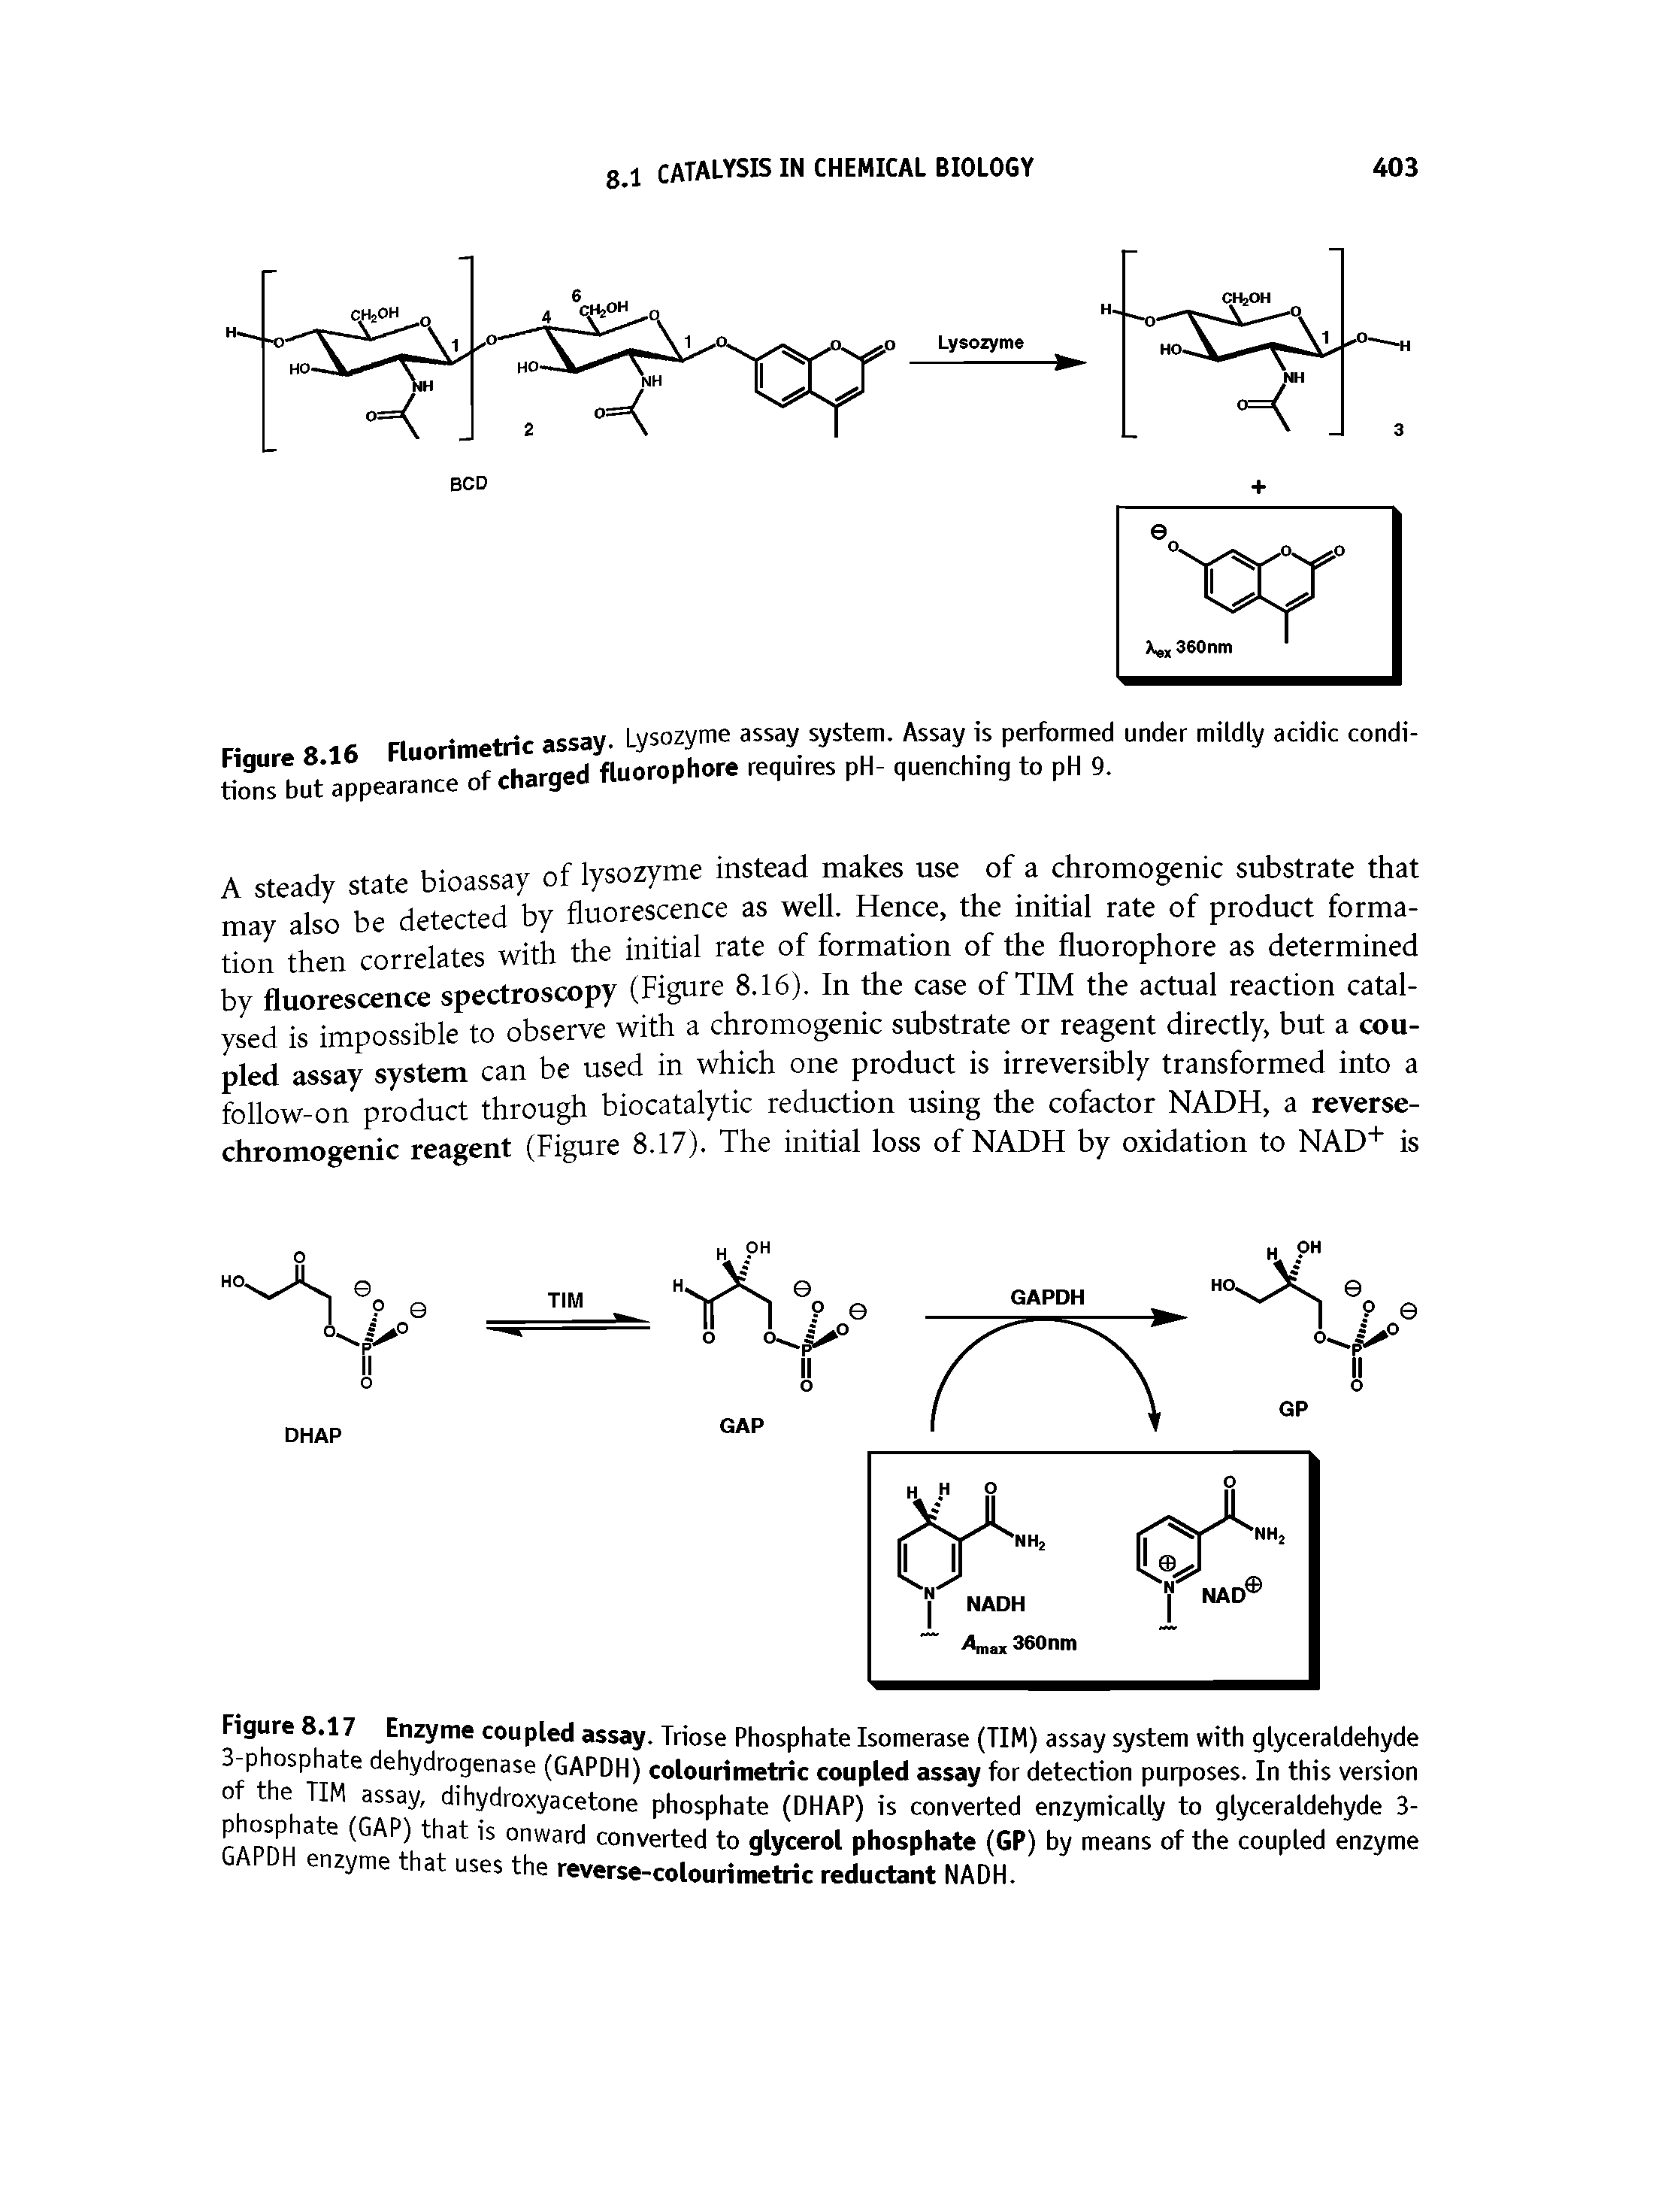 Figure 8.17 Enzyme coupled assay. Triose Phosphate Isomerase (TIM) assay system with glyceraldehyde 3-phosphate dehydrogenase (GAPDH) colourimetric coupled assay for detection purposes. In this version of the TIM assay, dihydroxyacetone phosphate (DHAP) is converted enzymically to glyceraldehyde 3-phosphate (GAP) that is onward converted to glycerol phosphate (GP) by means of the coupled enzyme GAPDH enzyme that uses the reverse-colourimetric reductant NADH.